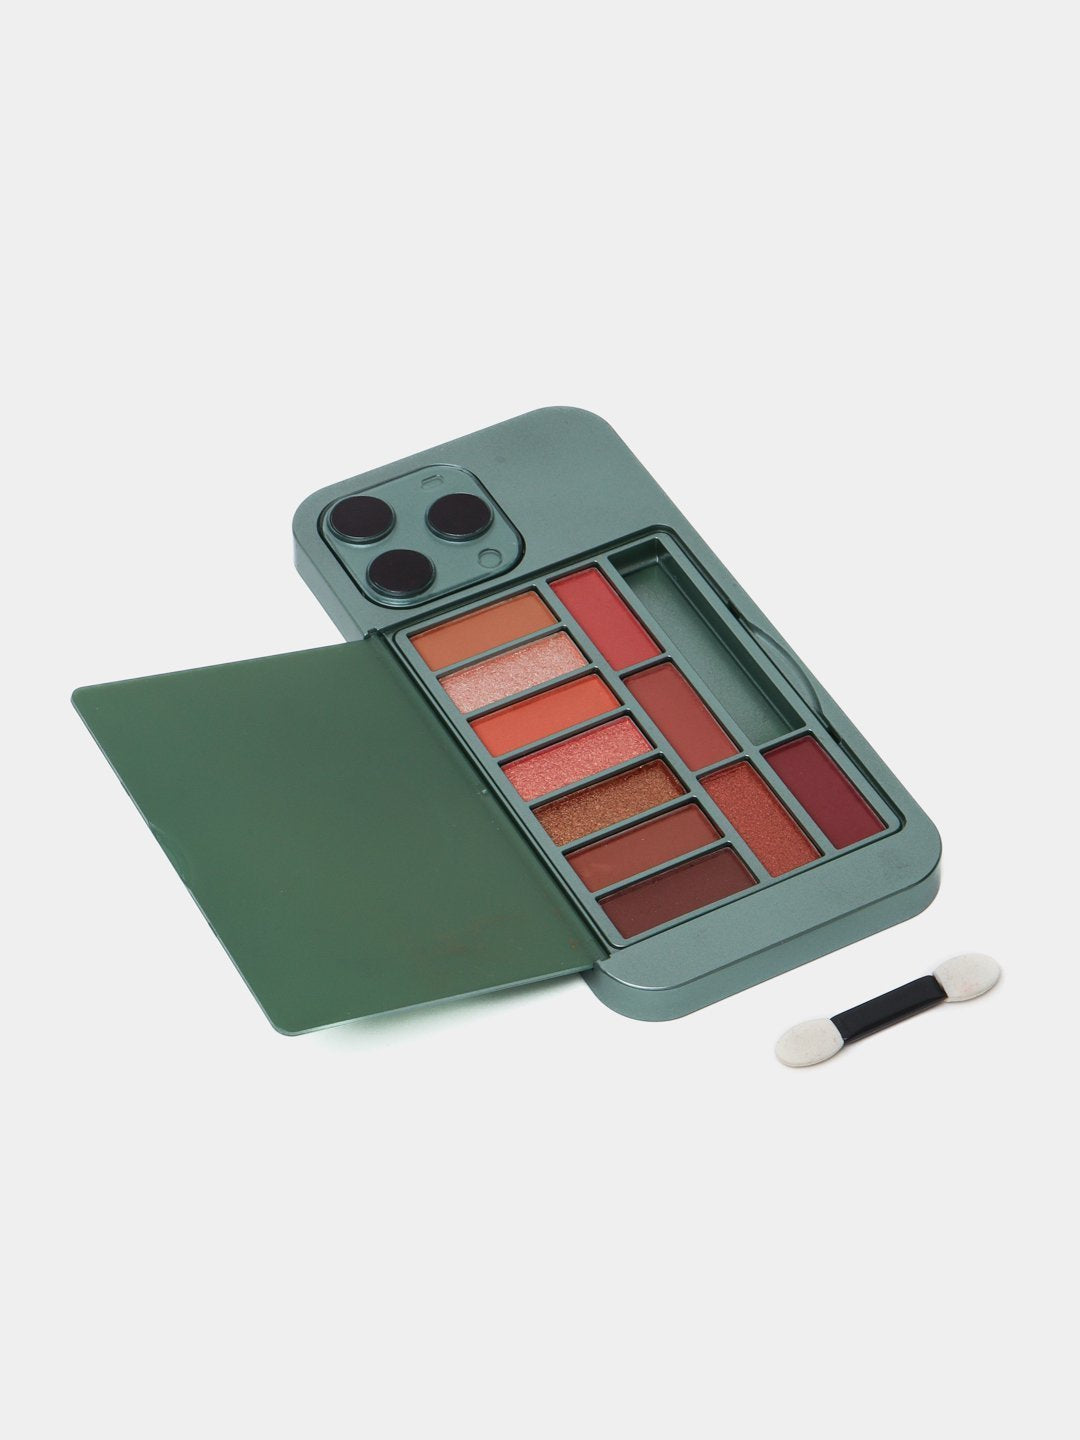 Iphone Shape Beauty Makeup Kit | Long Lasting Brightening Complexion And Highlight Blush Palette With Mirror Back (random Colors)